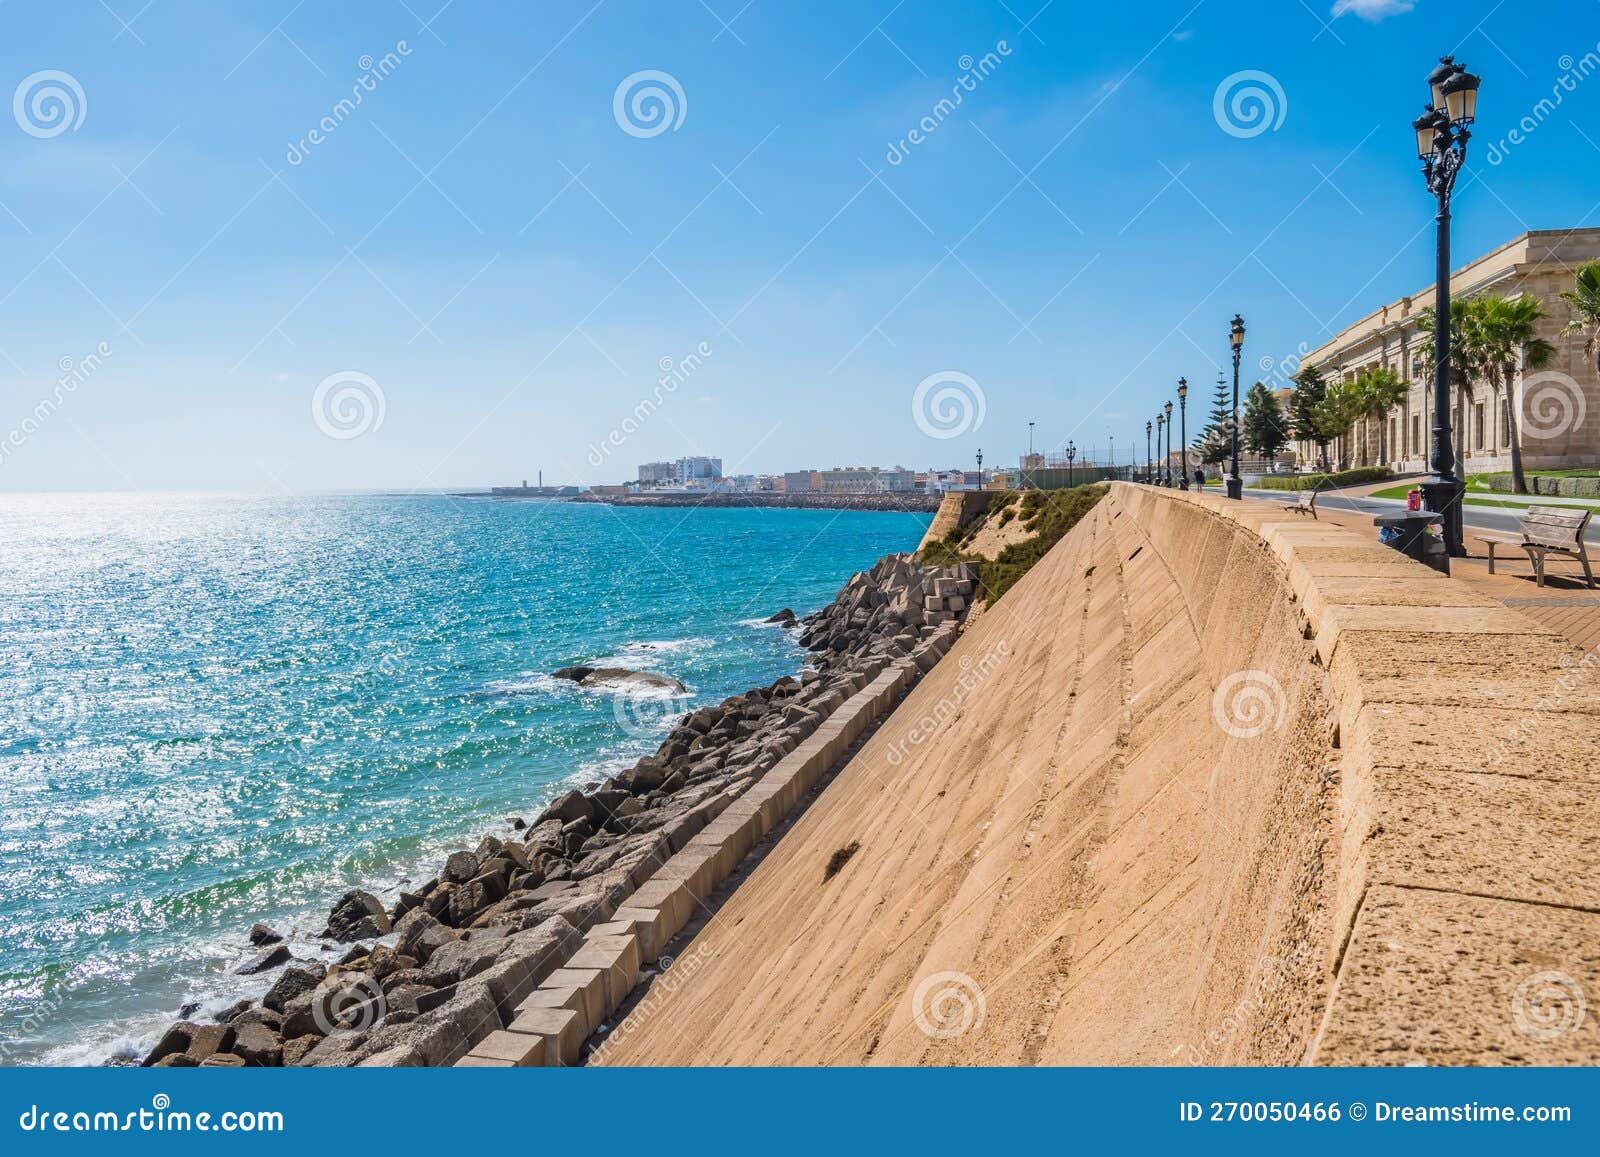 stone wall and breakwater with blue sea and coastline of cÃ¡diz with sunlight on horizon, spain